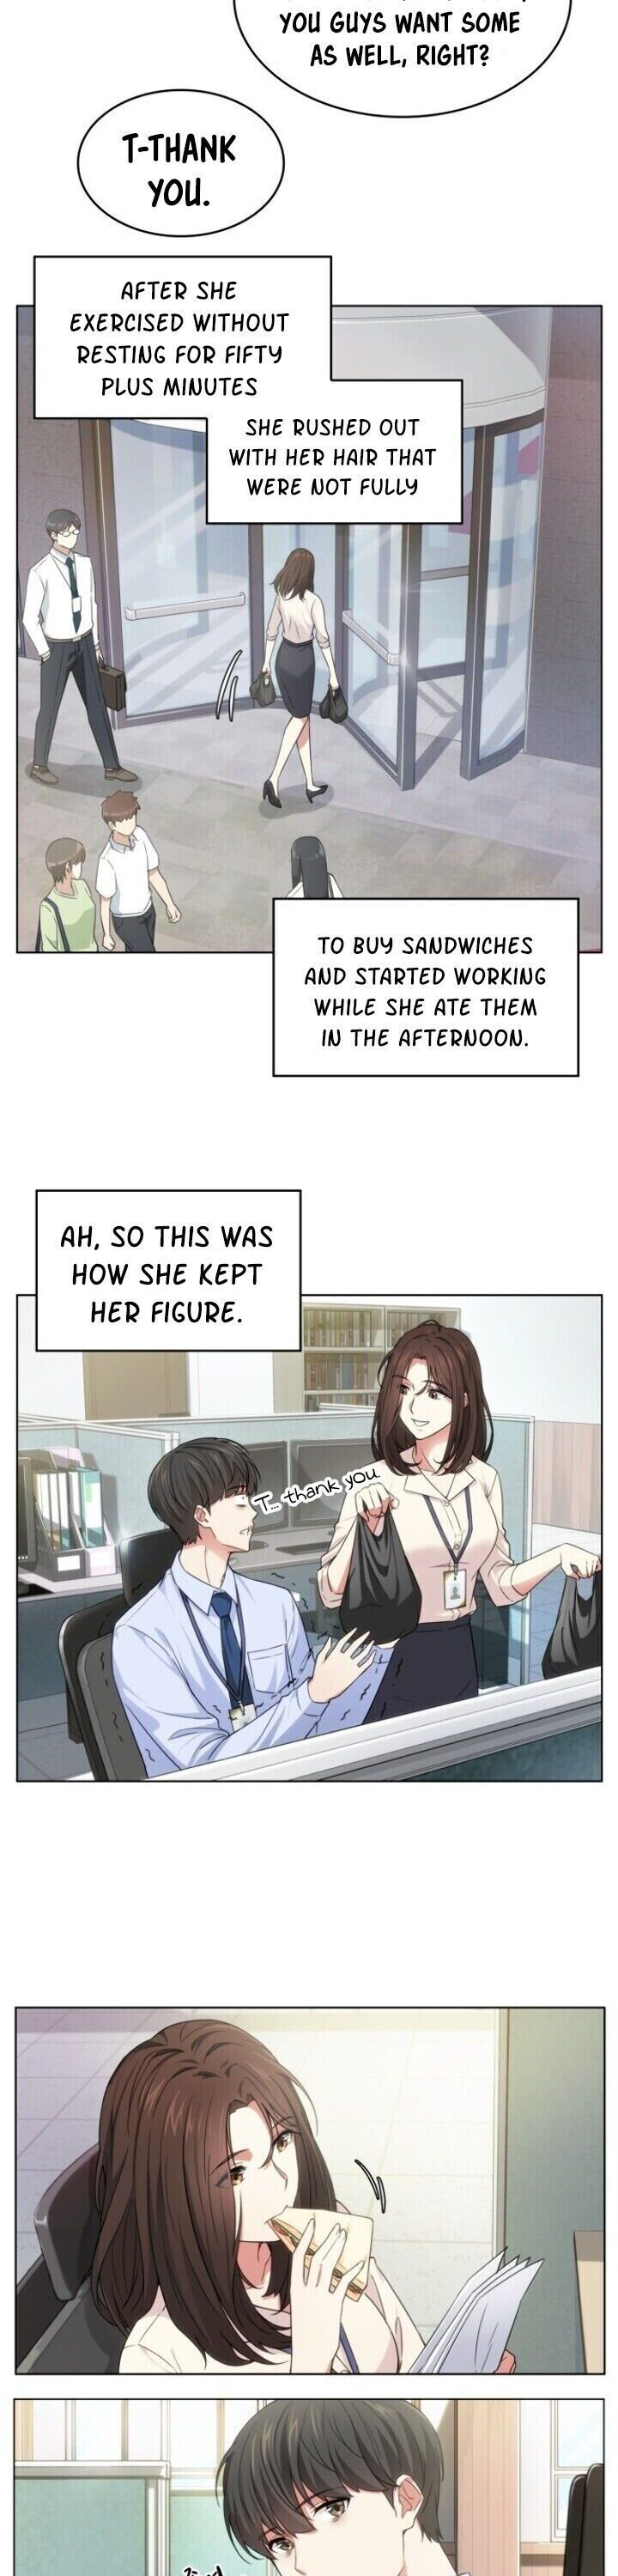 My Office Noona’s Story - Chapter 4 Page 10